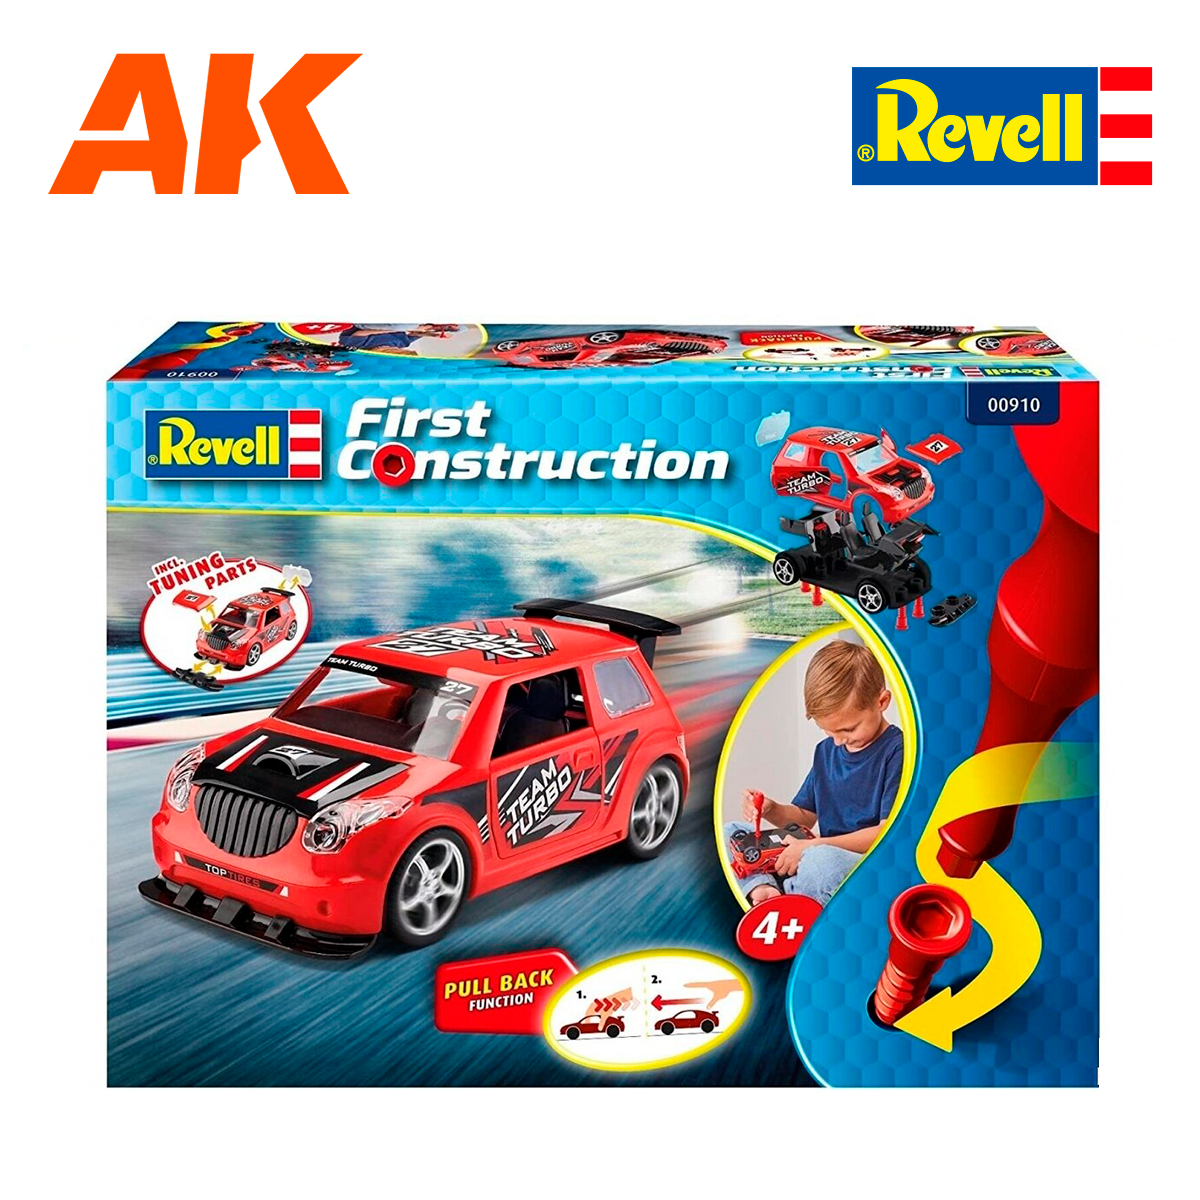 1/20 First Construction – Rallye Car with pullback motor, red